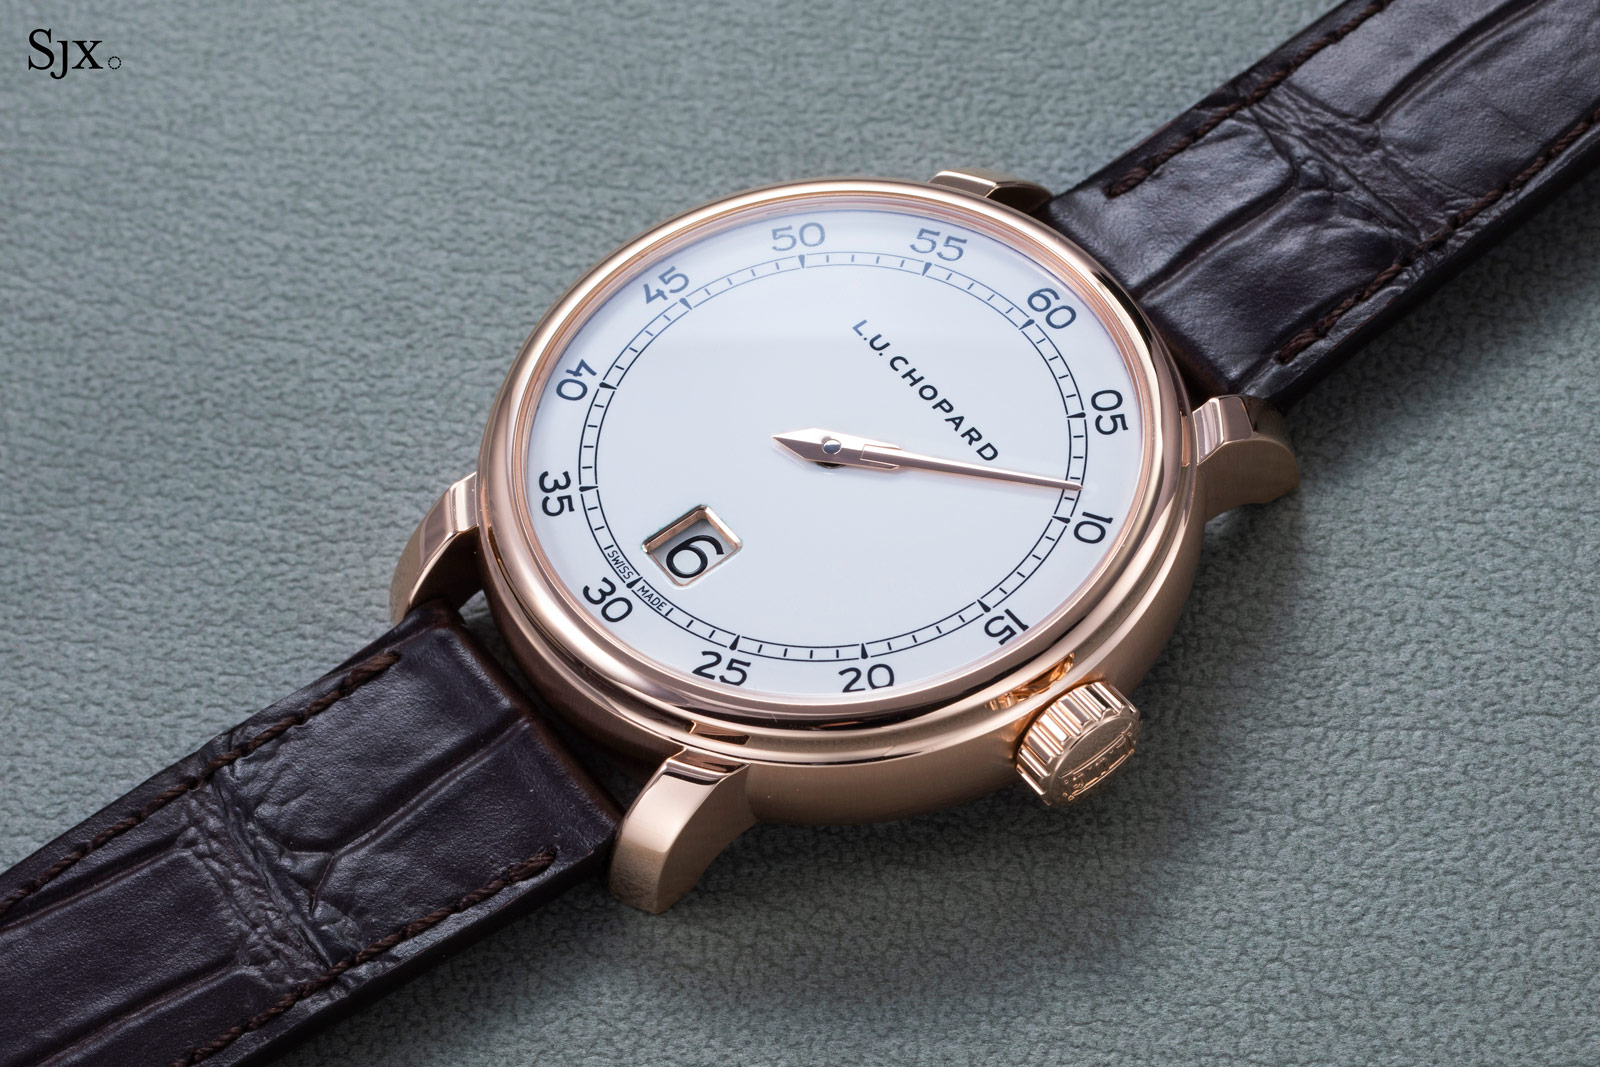 Award winning quality with vintage class - LUC Chopard 